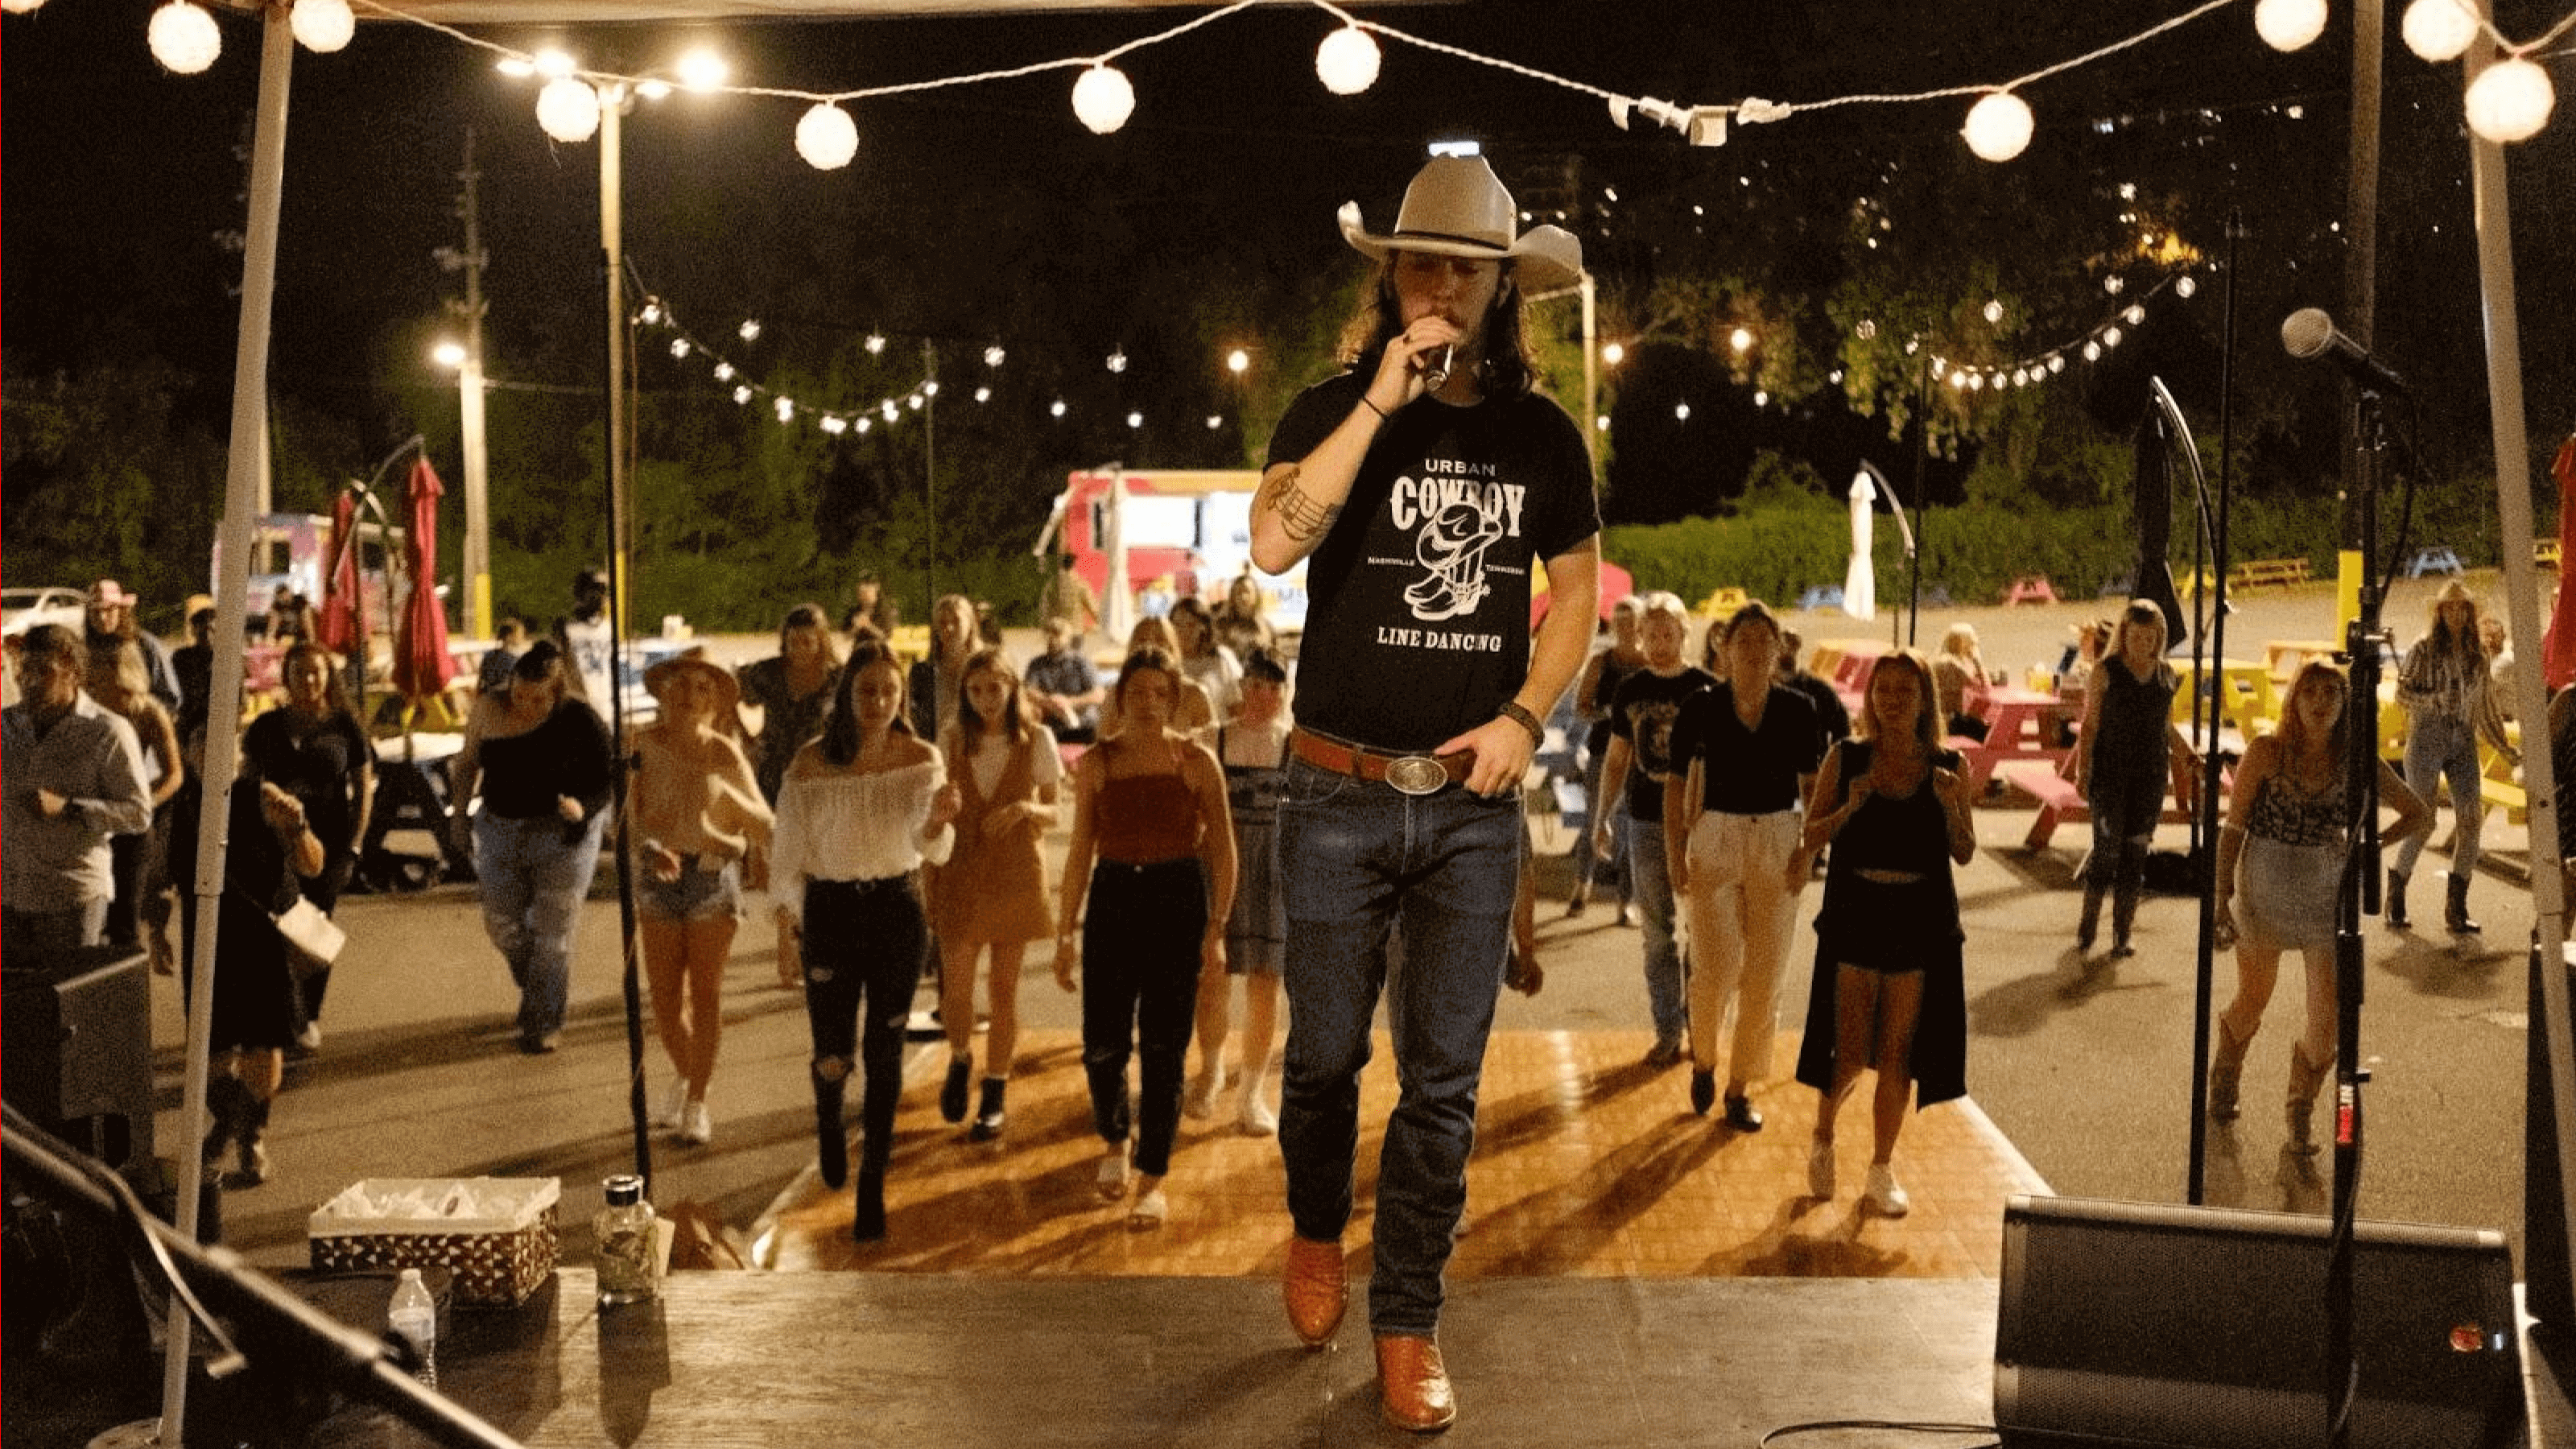 People learning how to country dance at an experiential marketing event